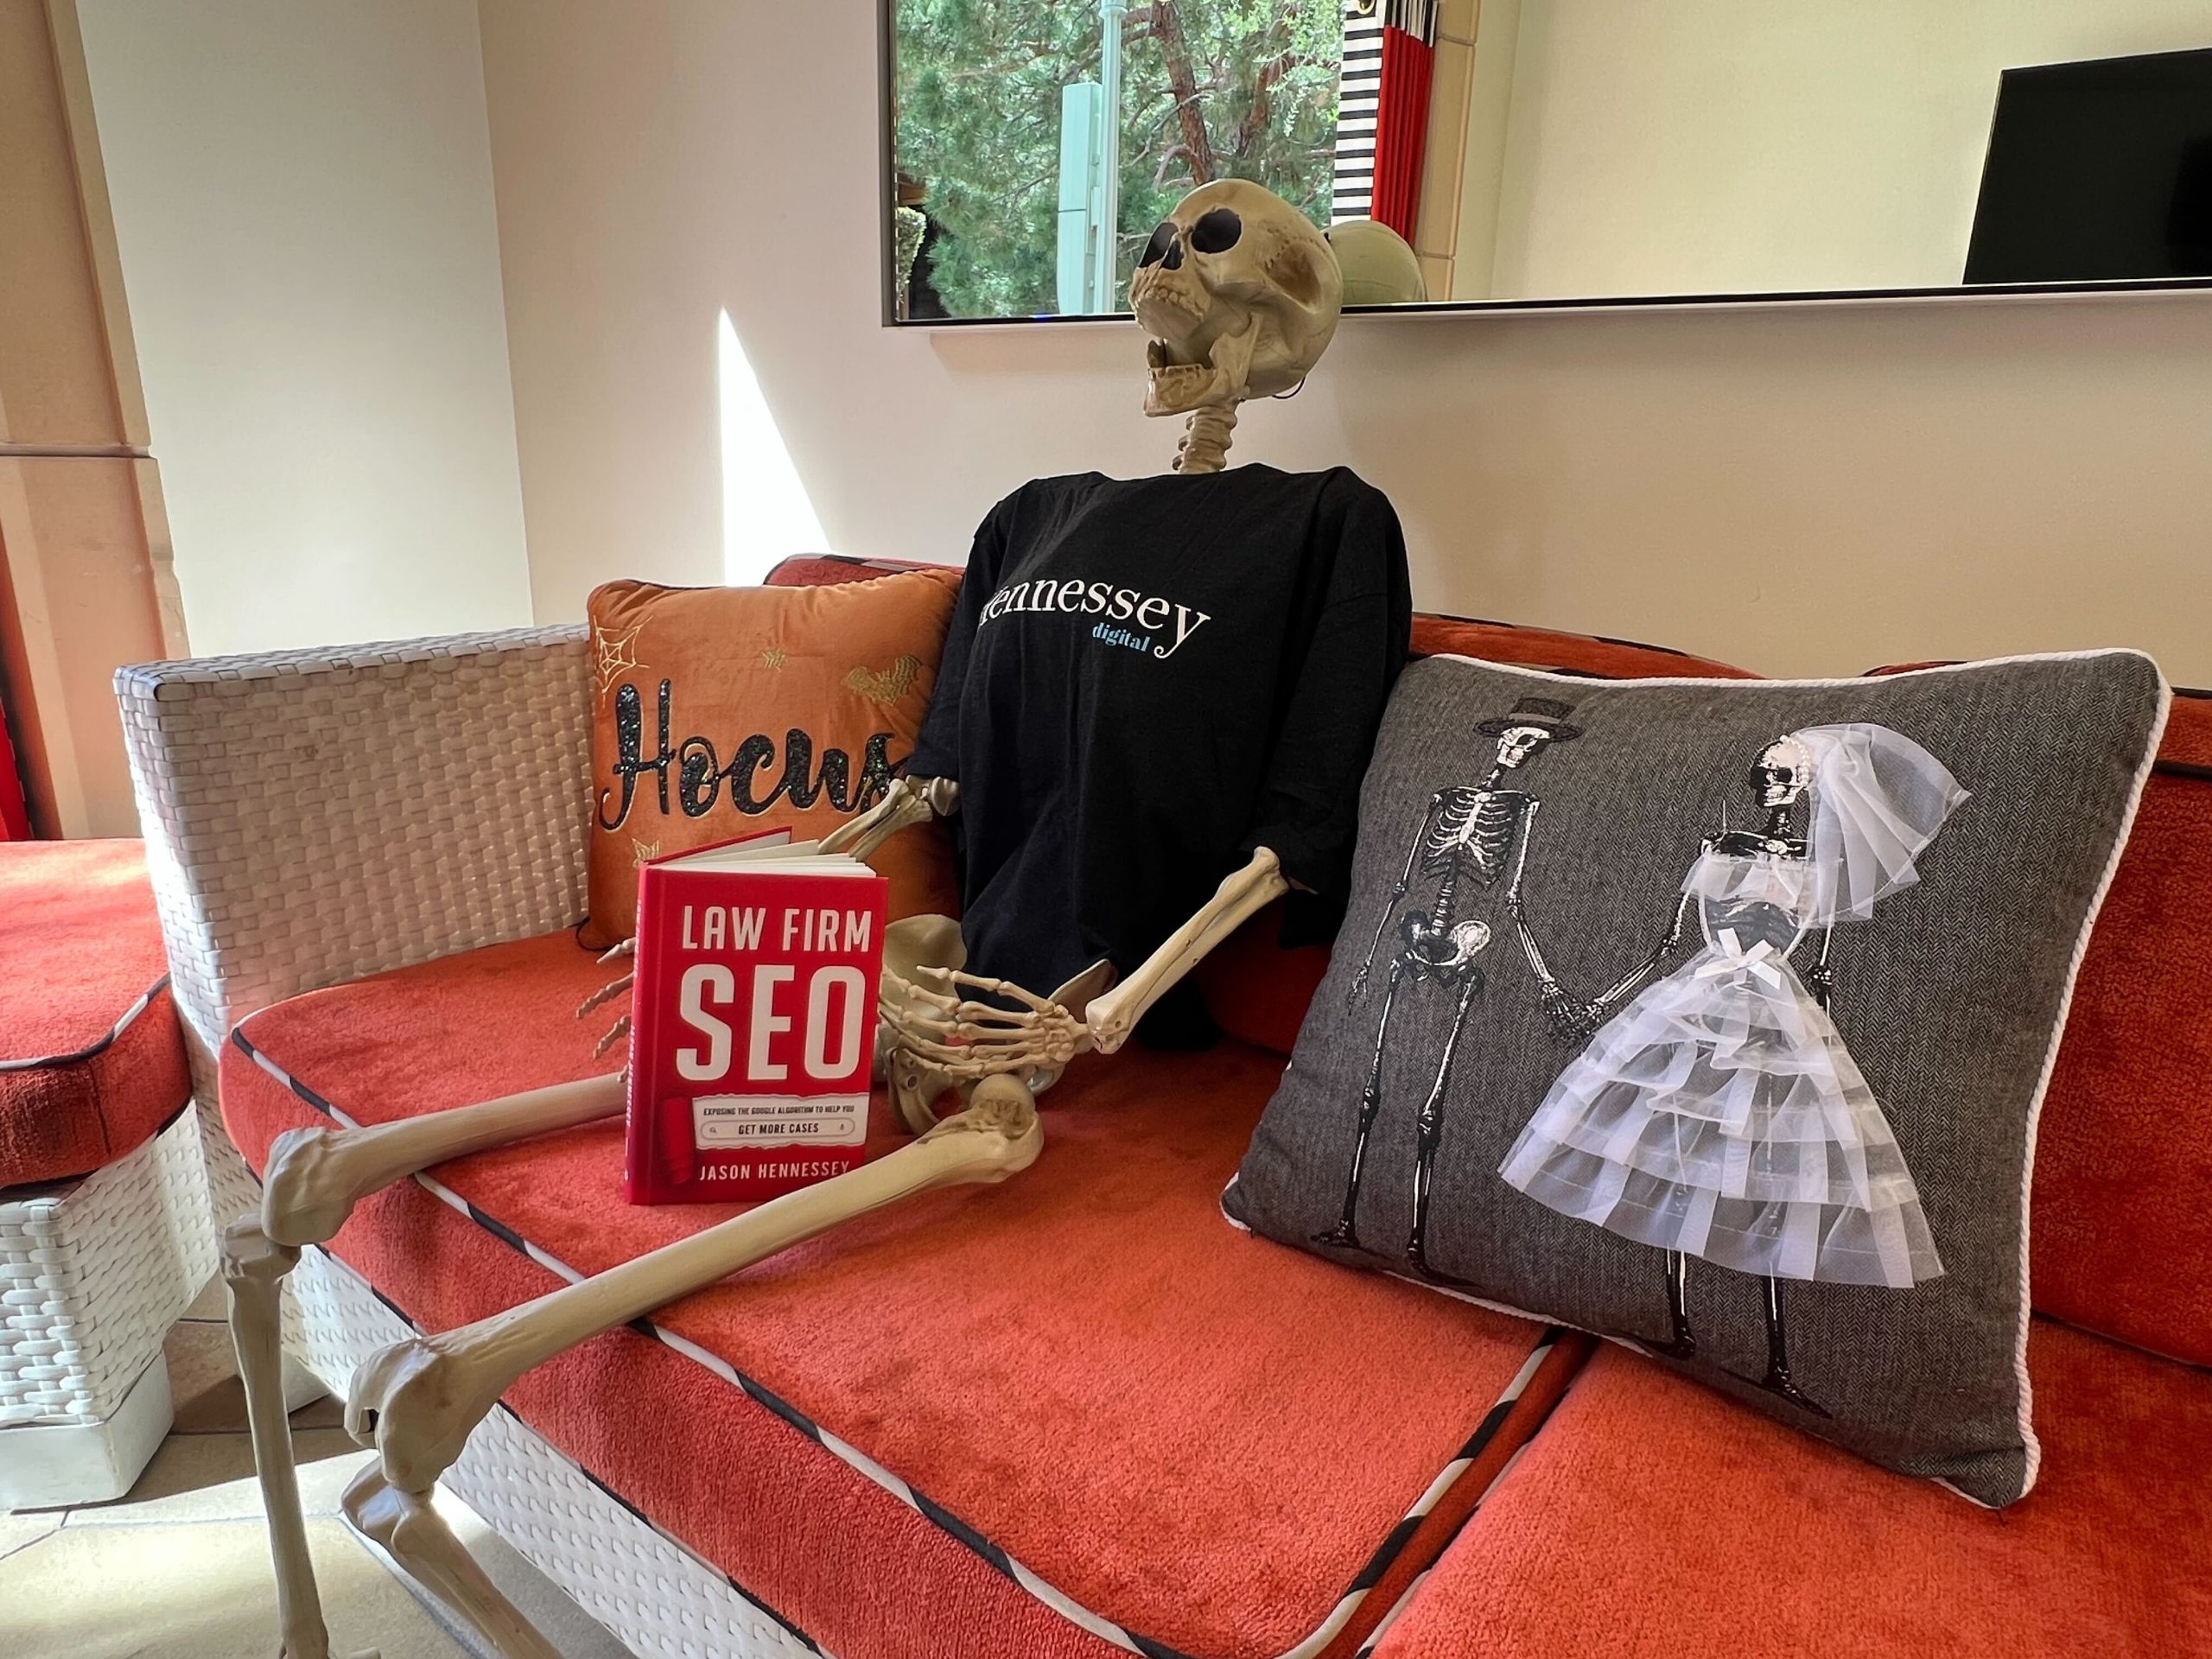 Law Firm SEO at Hennessey Digital's haunted cabana